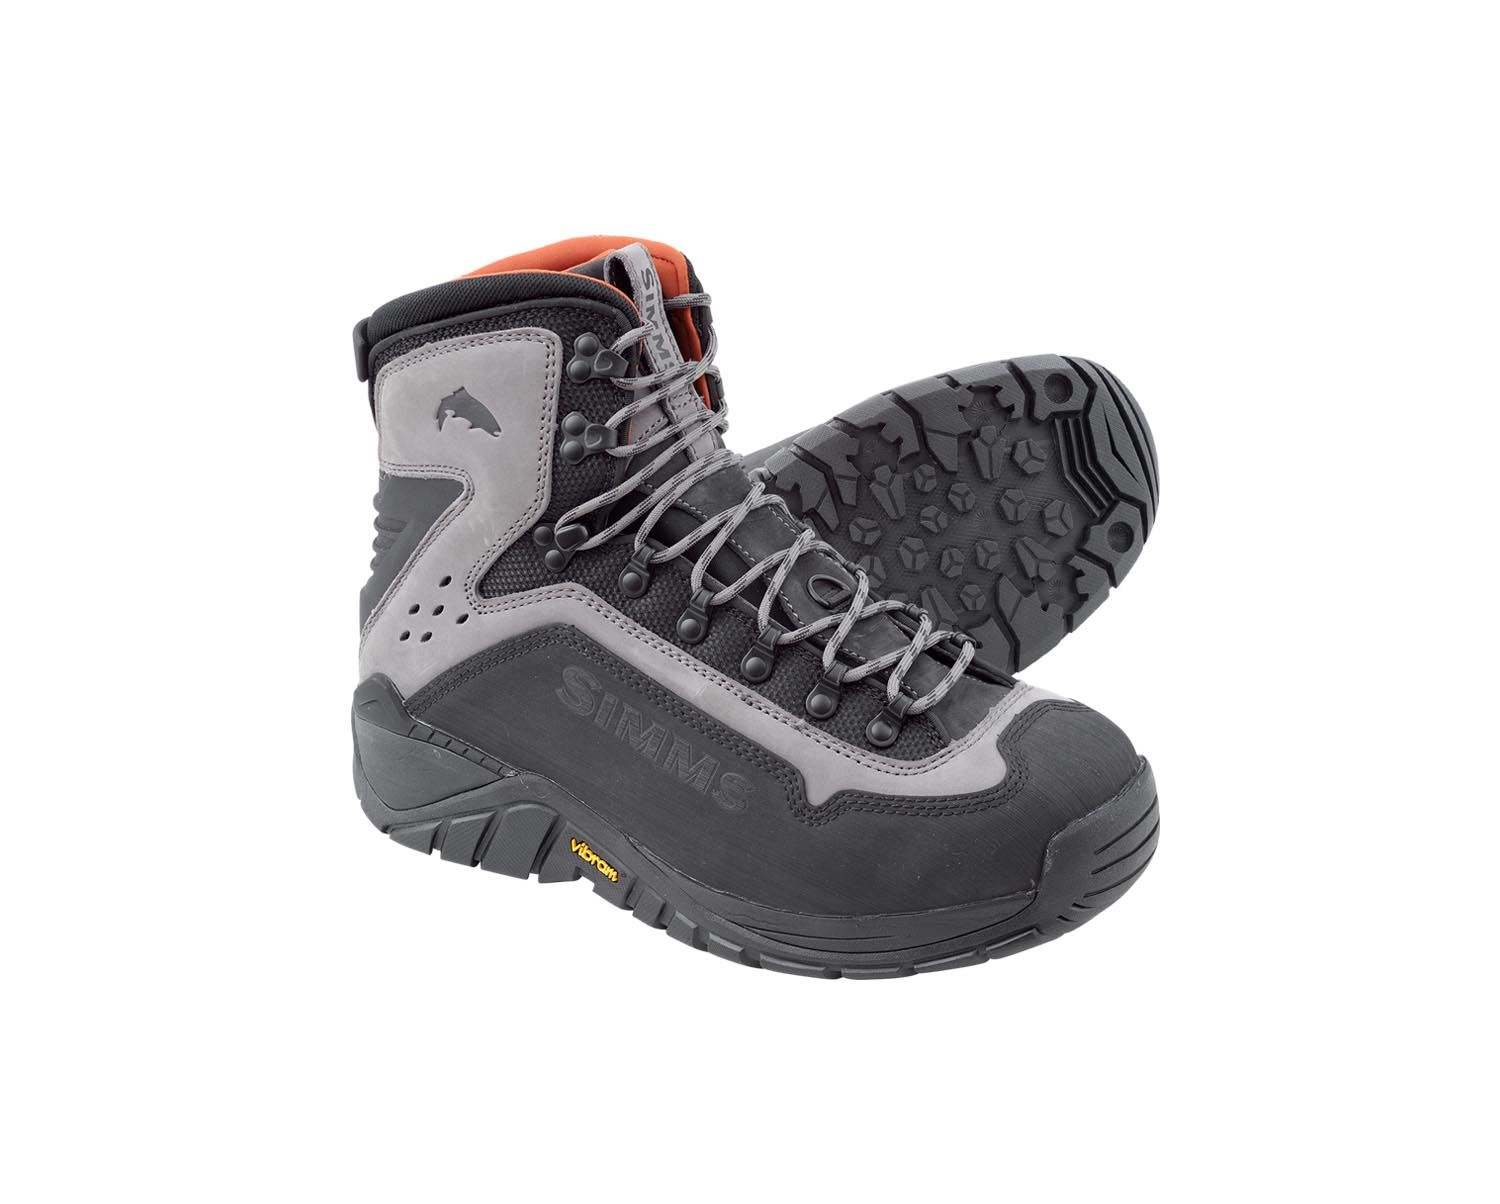 WADING - WADING BOOTS - Ascent Fly Fishing